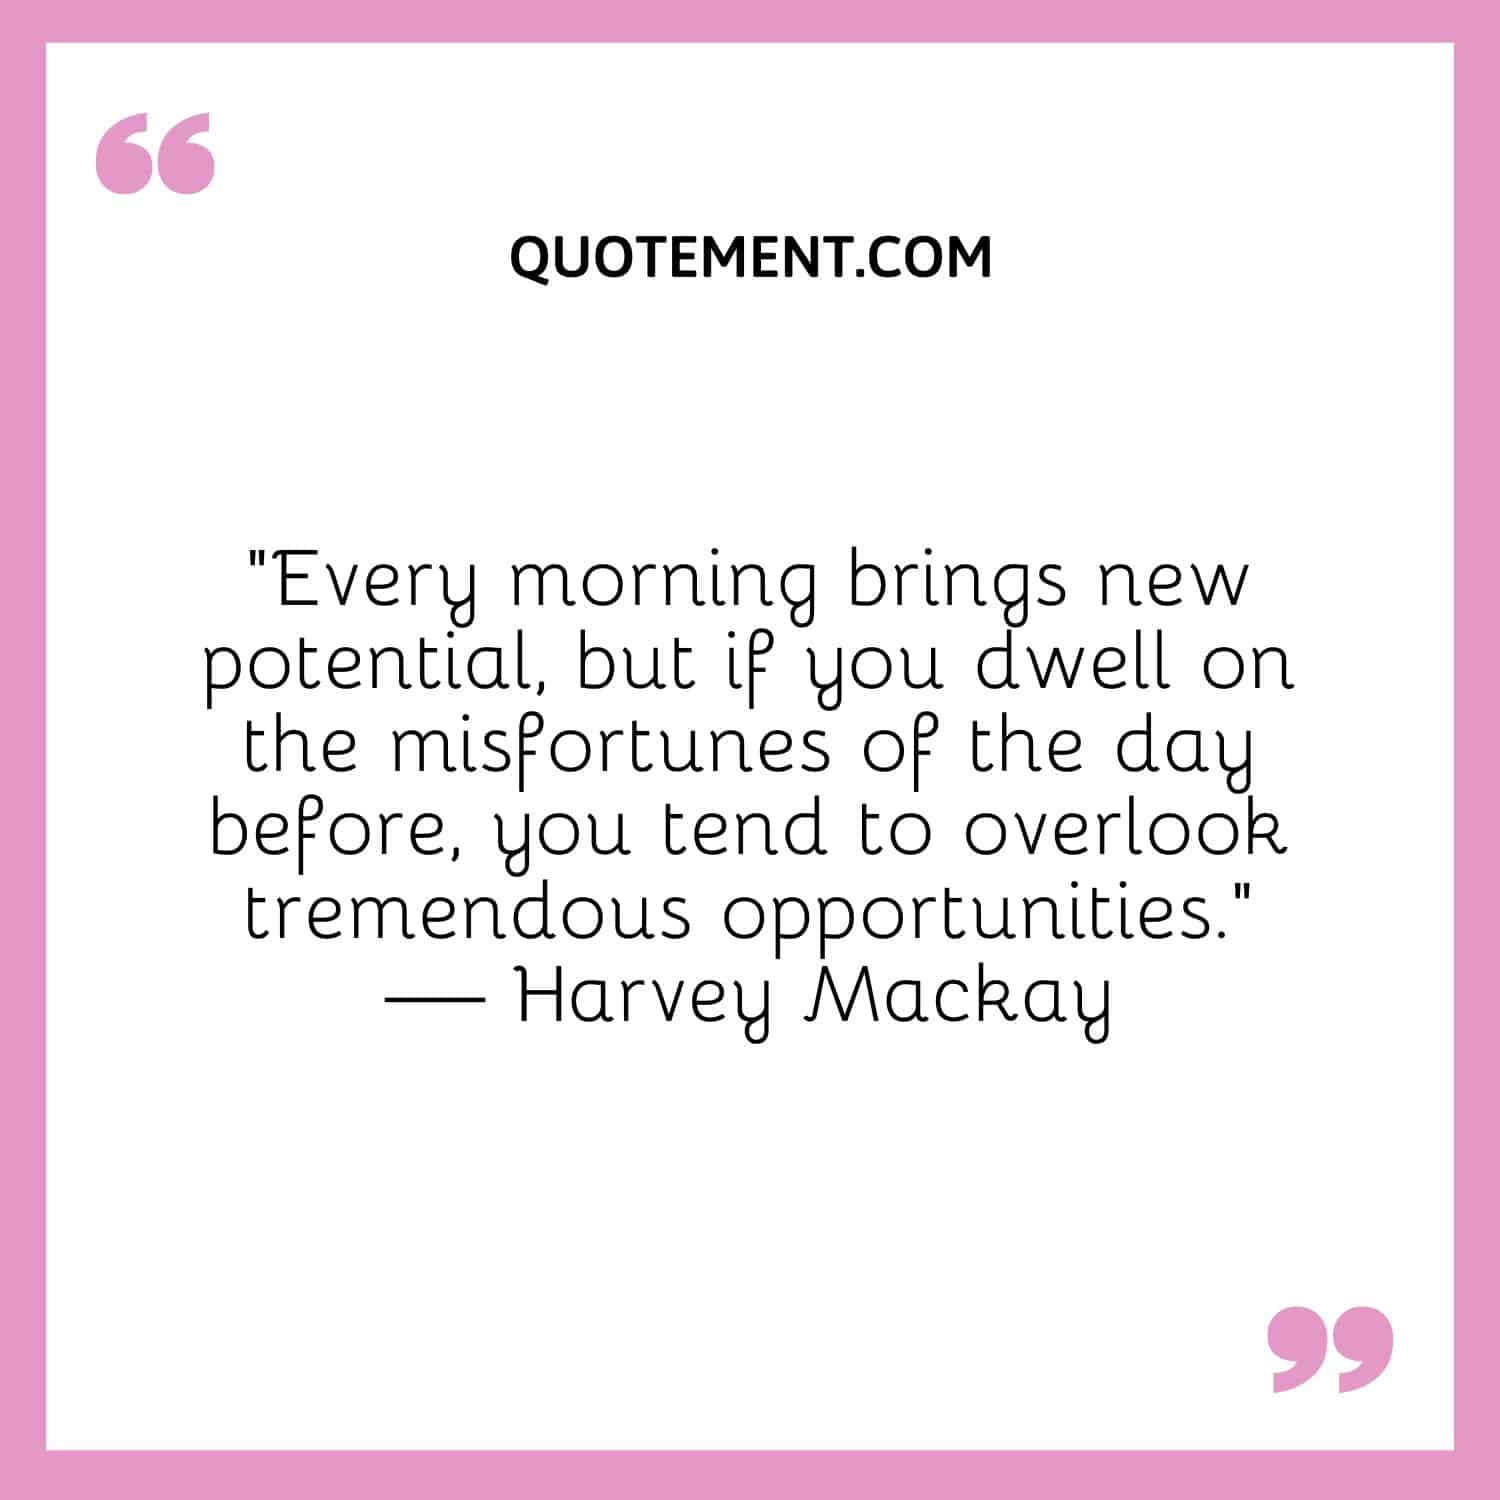 Every morning brings new potential